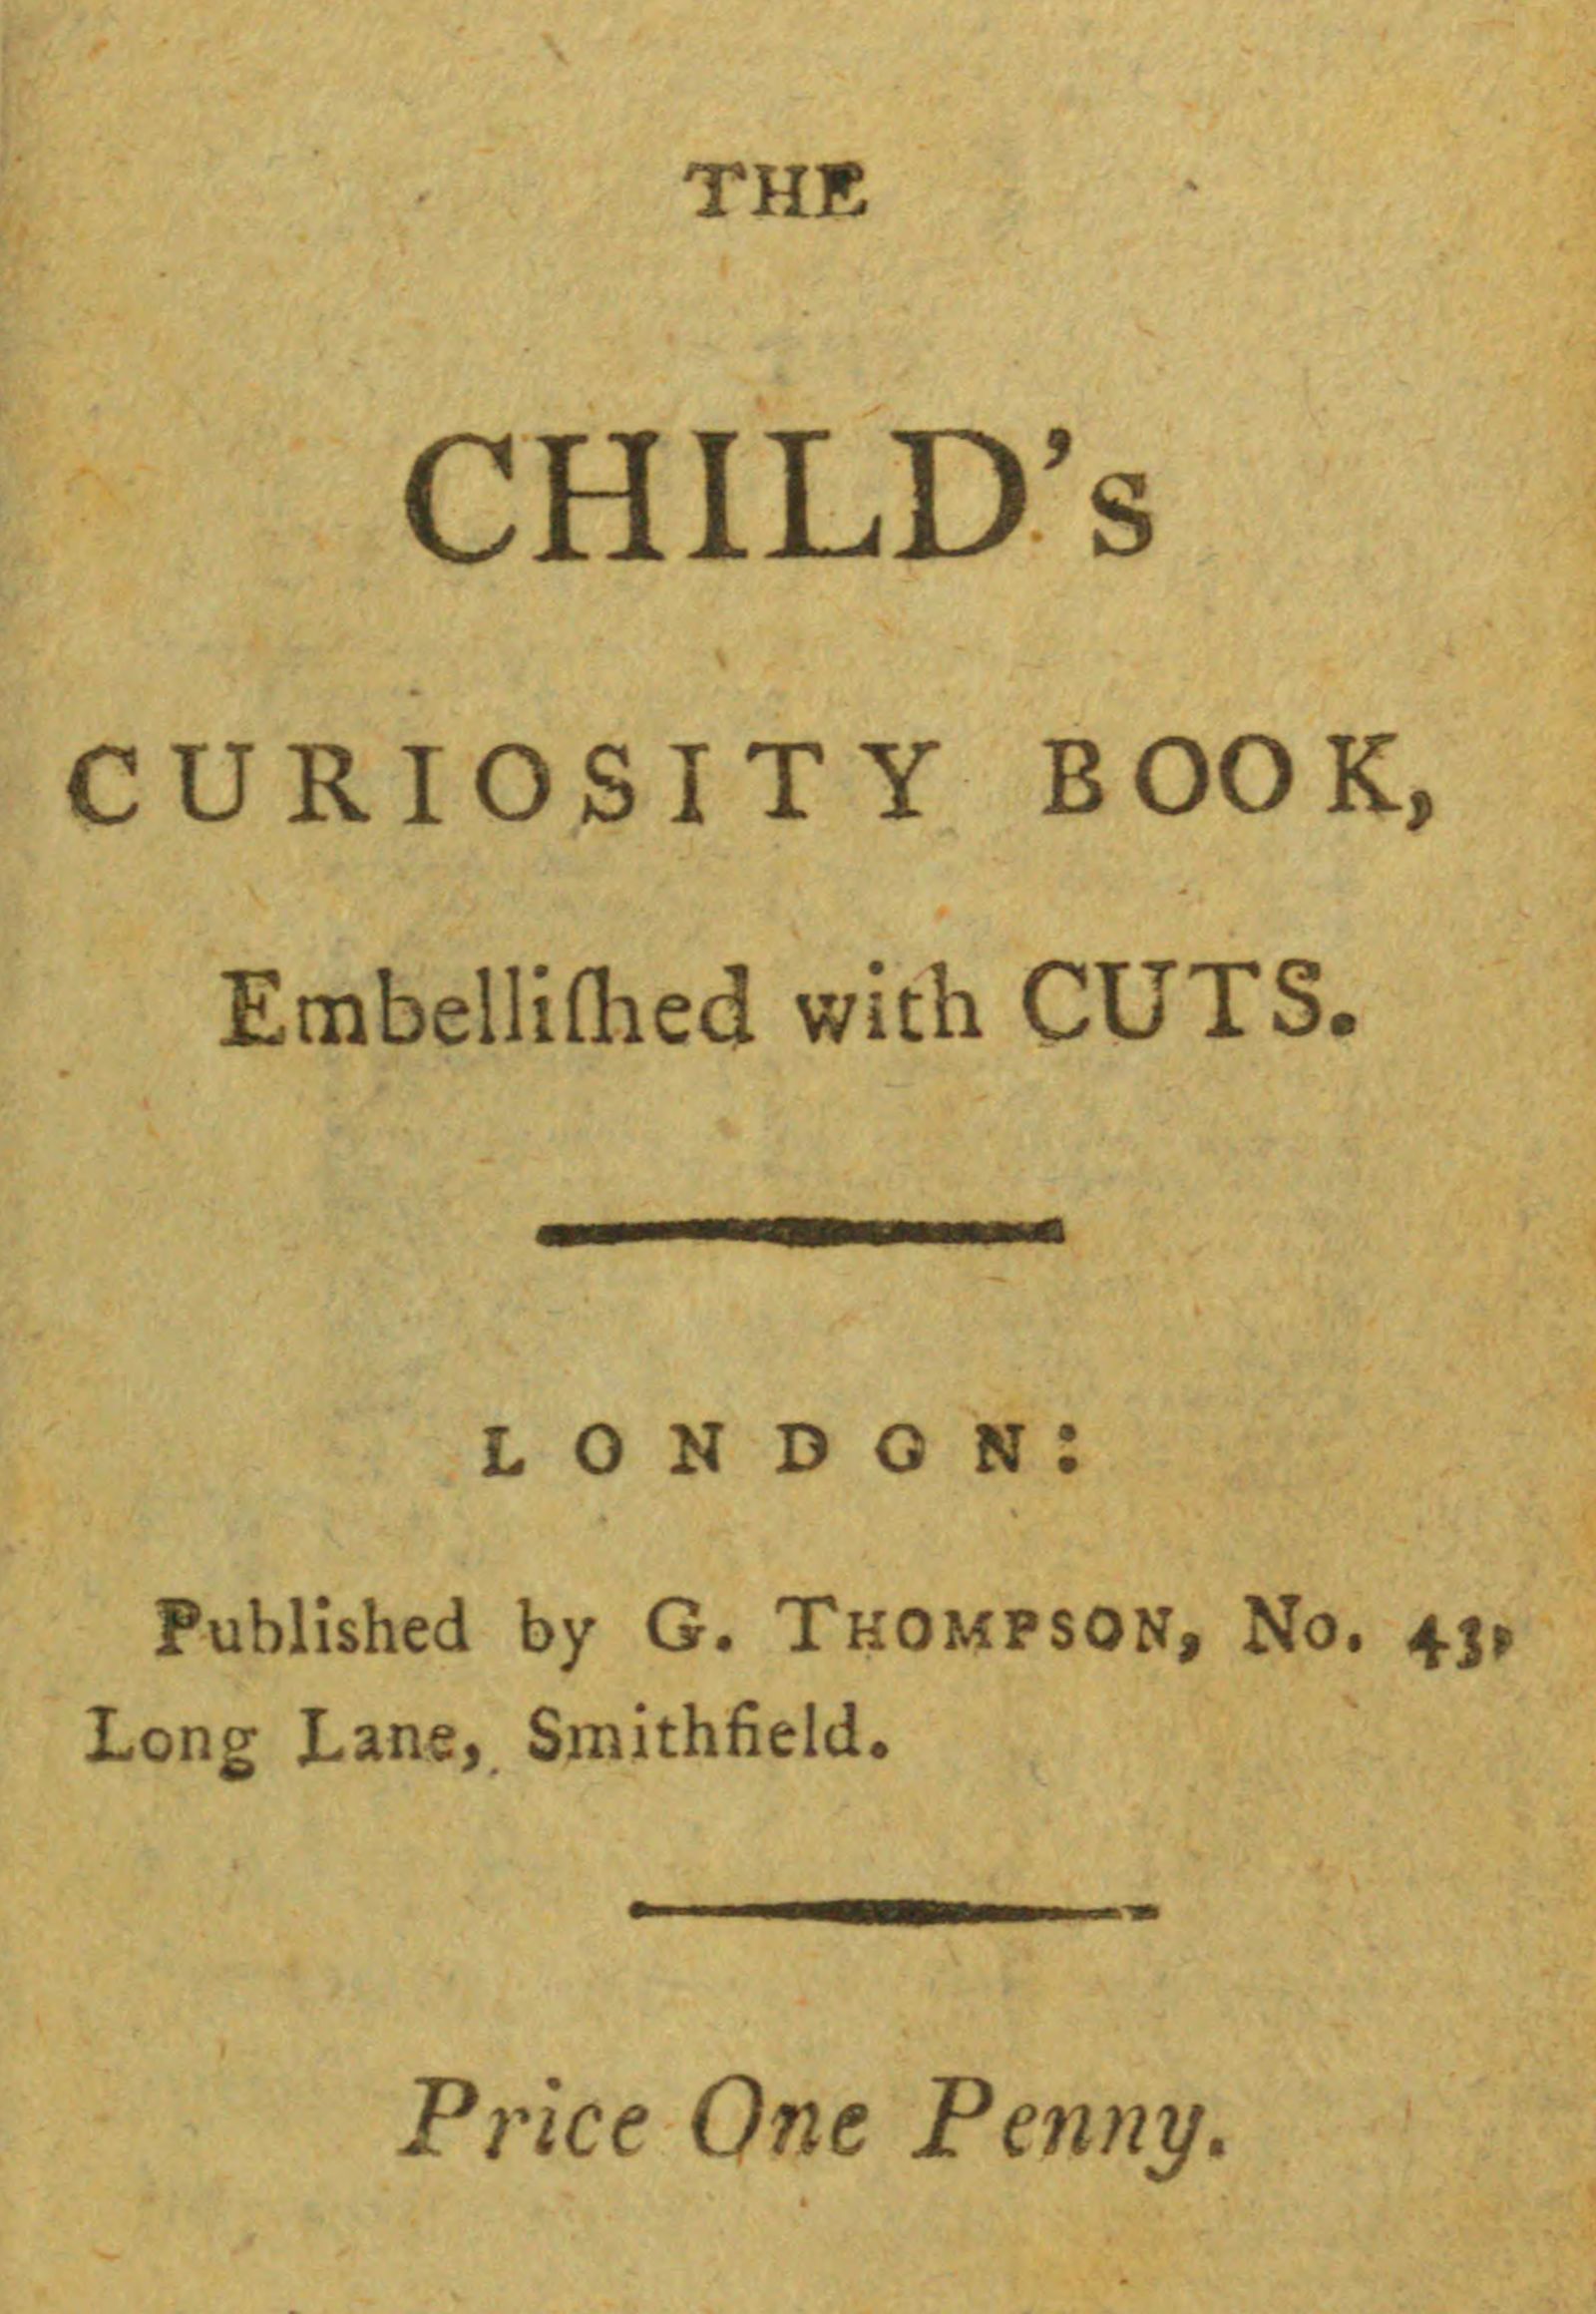 The child's curiosity book, embellished with cuts.